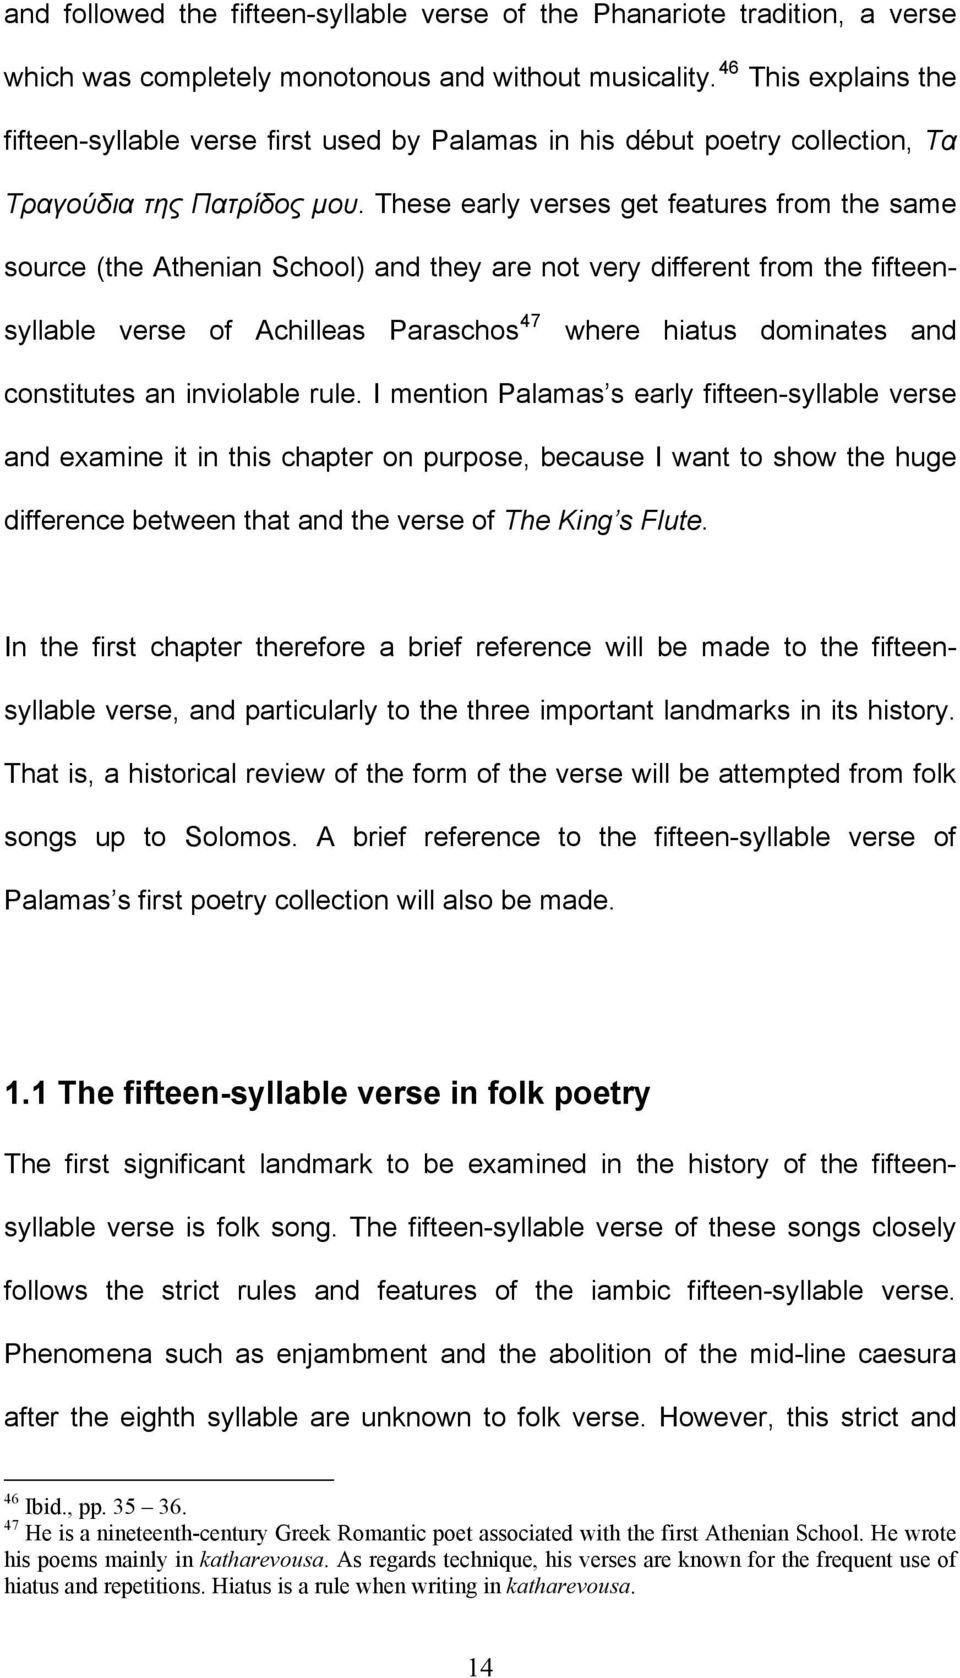 These early verses get features from the same source (the Athenian School) and they are not very different from the fifteensyllable verse of Achilleas Paraschos 47 where hiatus dominates and